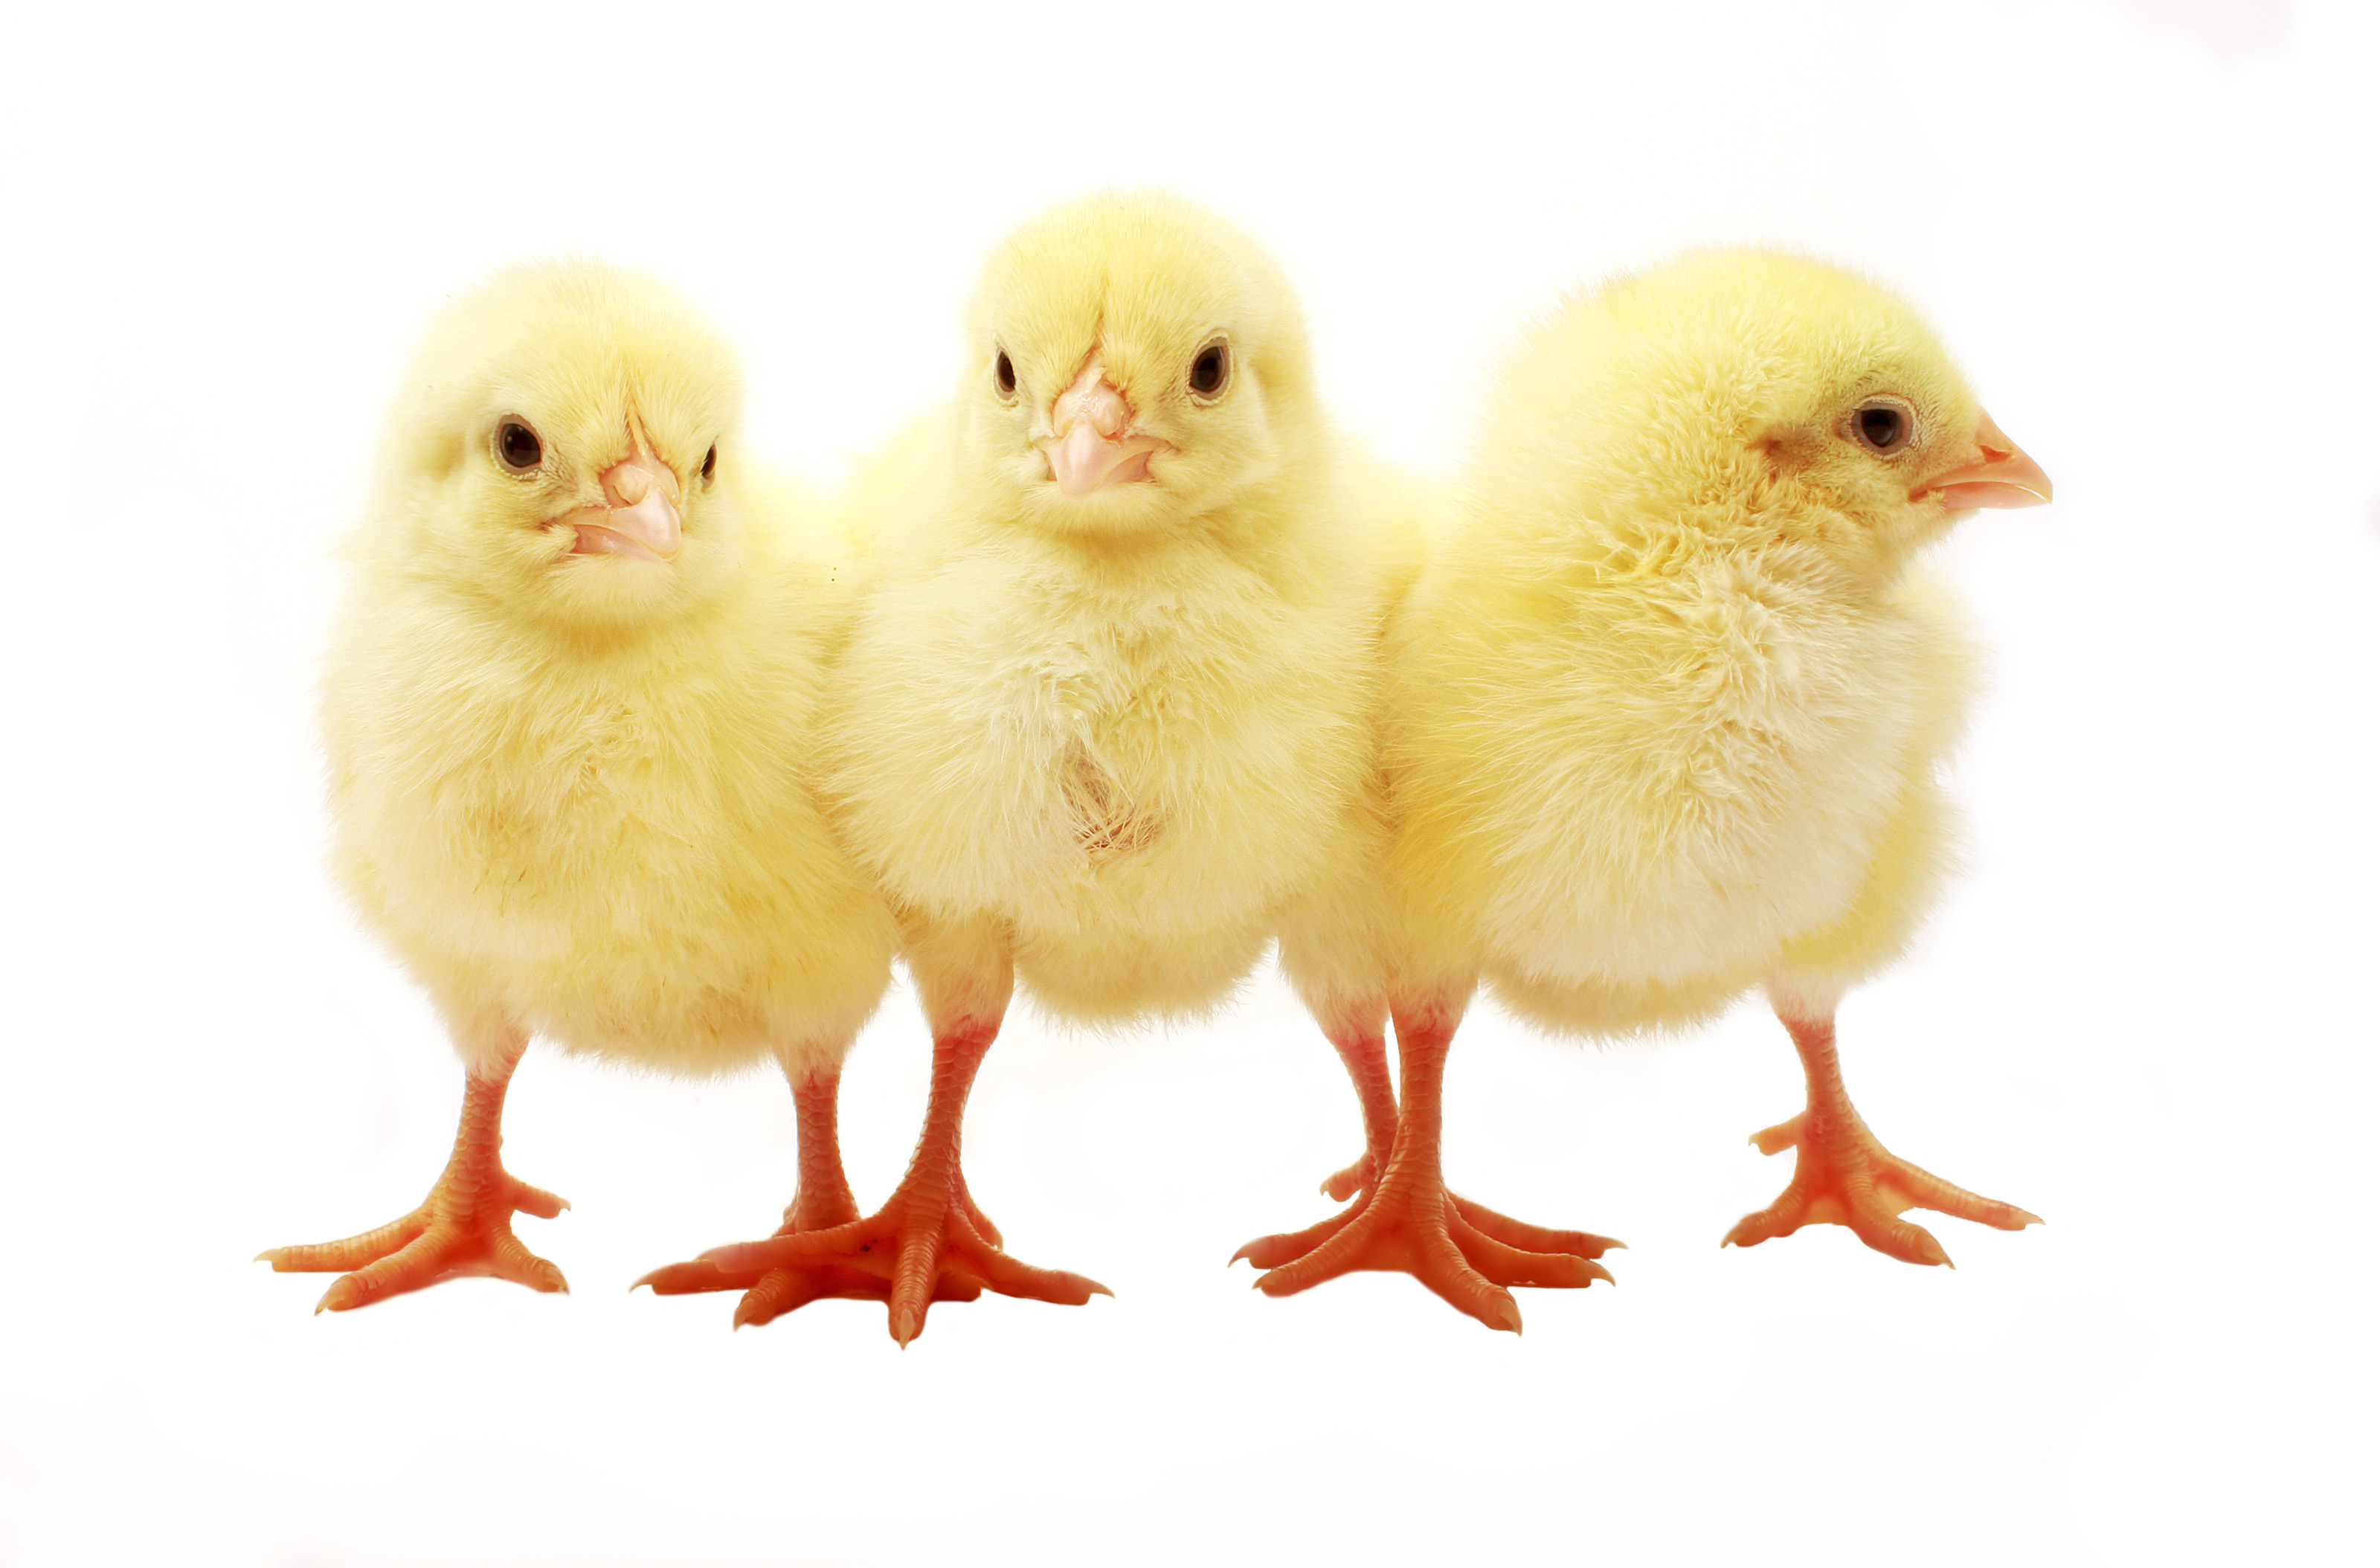 Three Isolated Easter Chicks - Words Matter